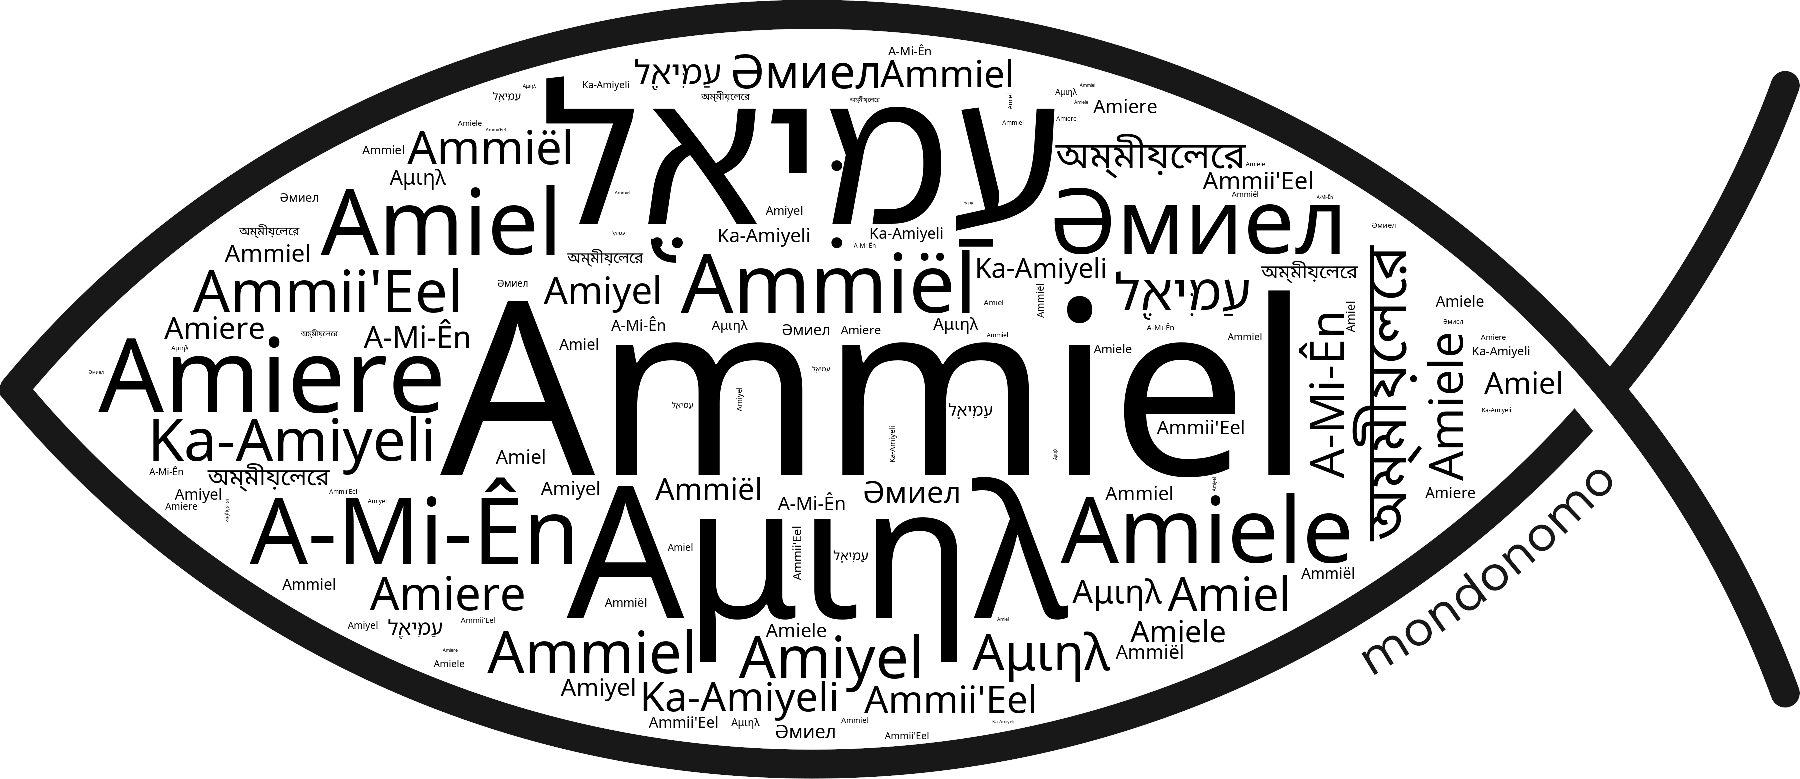 Name Ammiel in the world's Bibles